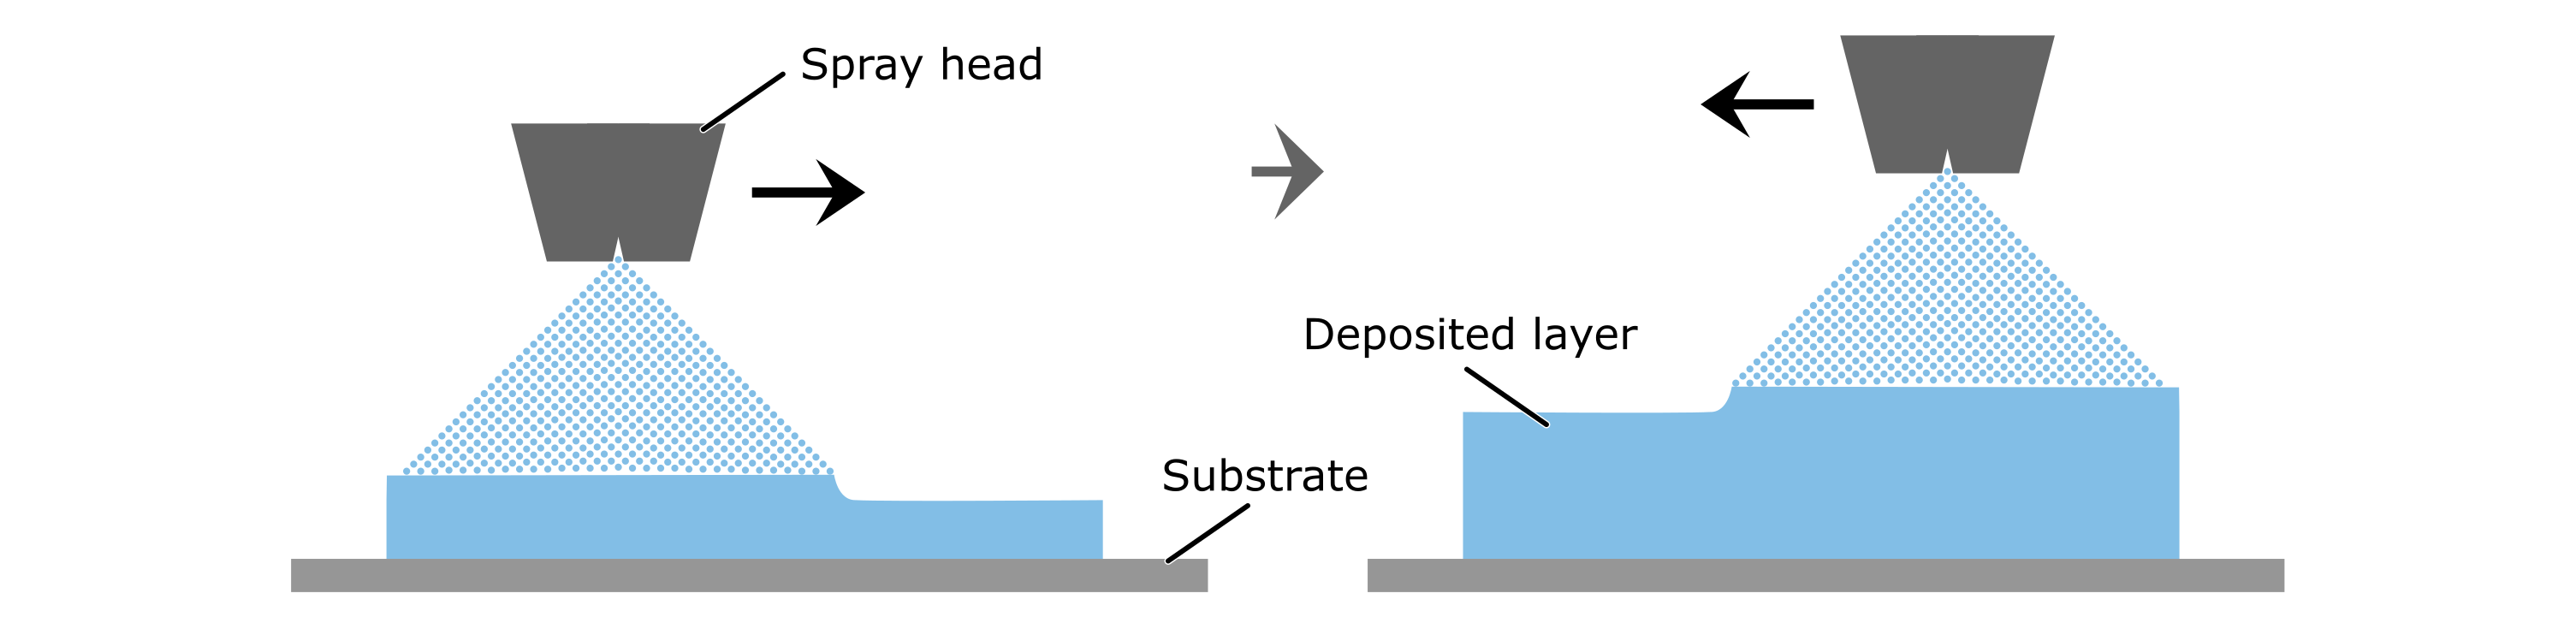 Manufacturing of membranes and electrodes